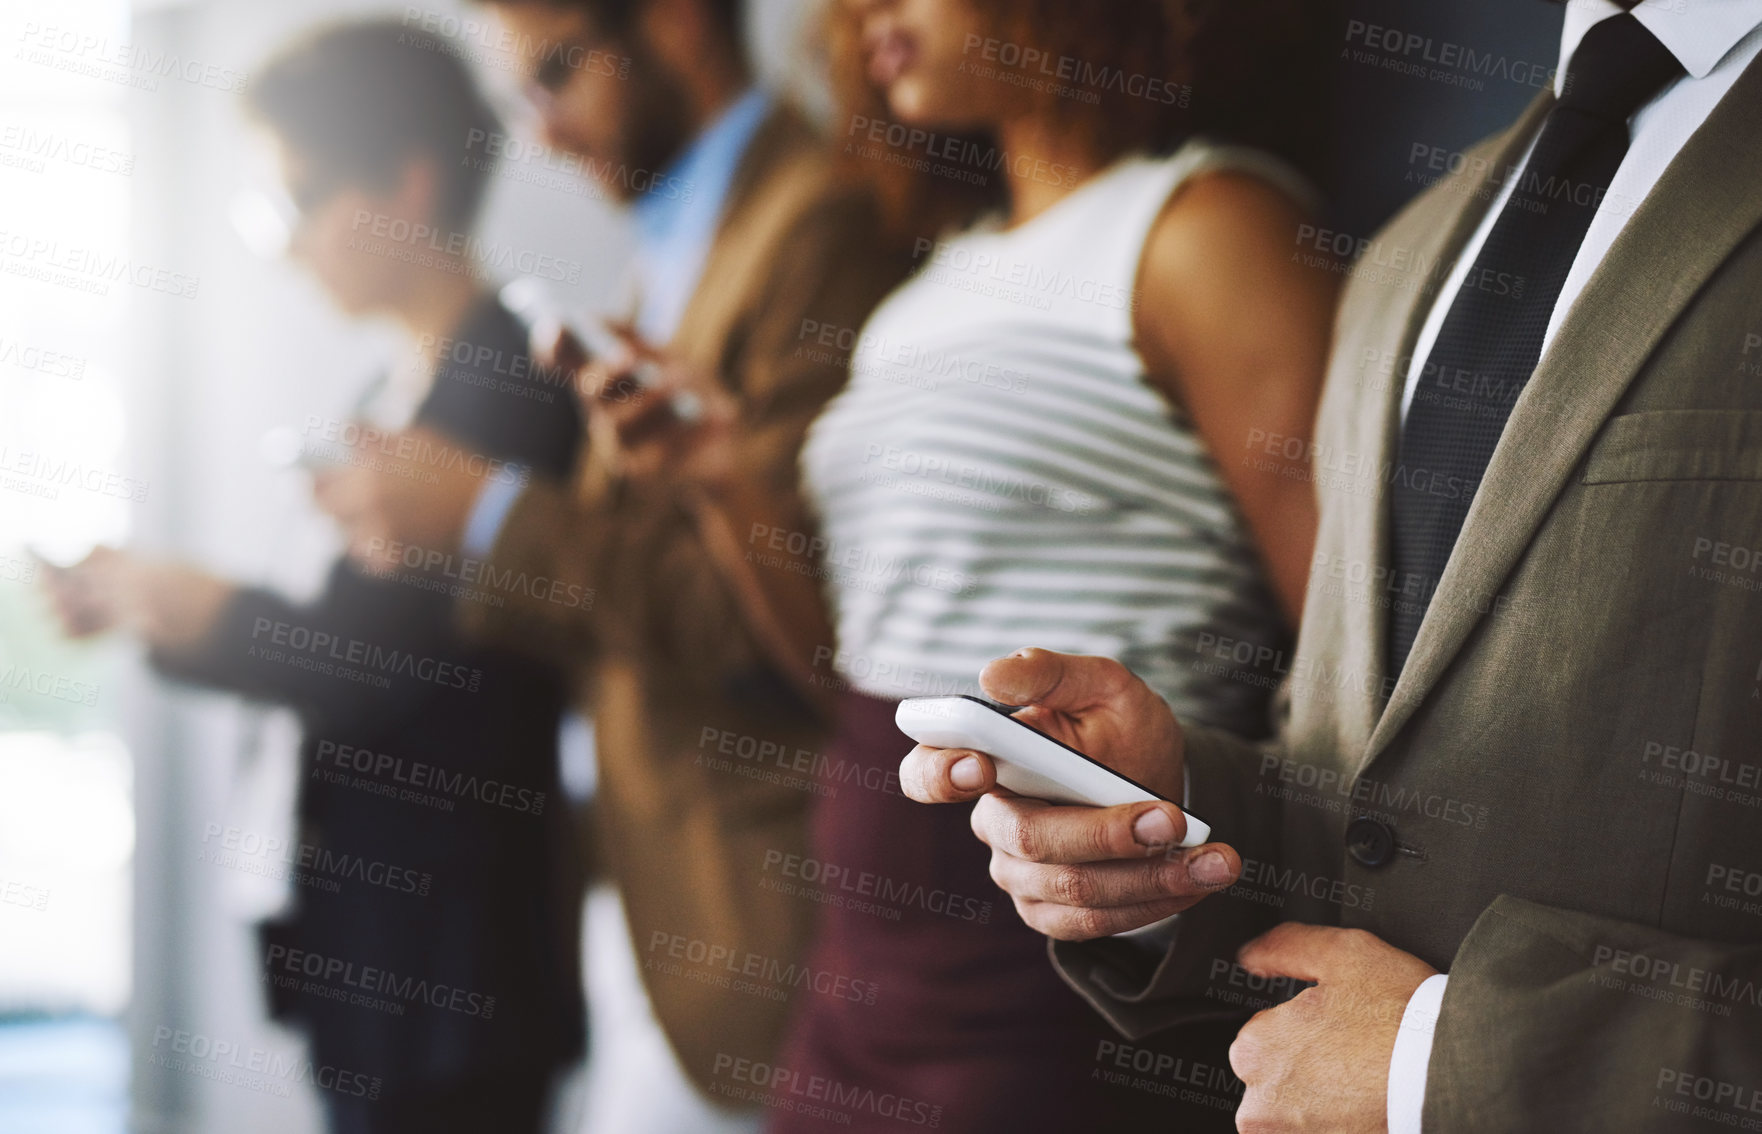 Buy stock photo Shot of a businessperson using his cellphone with colleagues blurred in the background